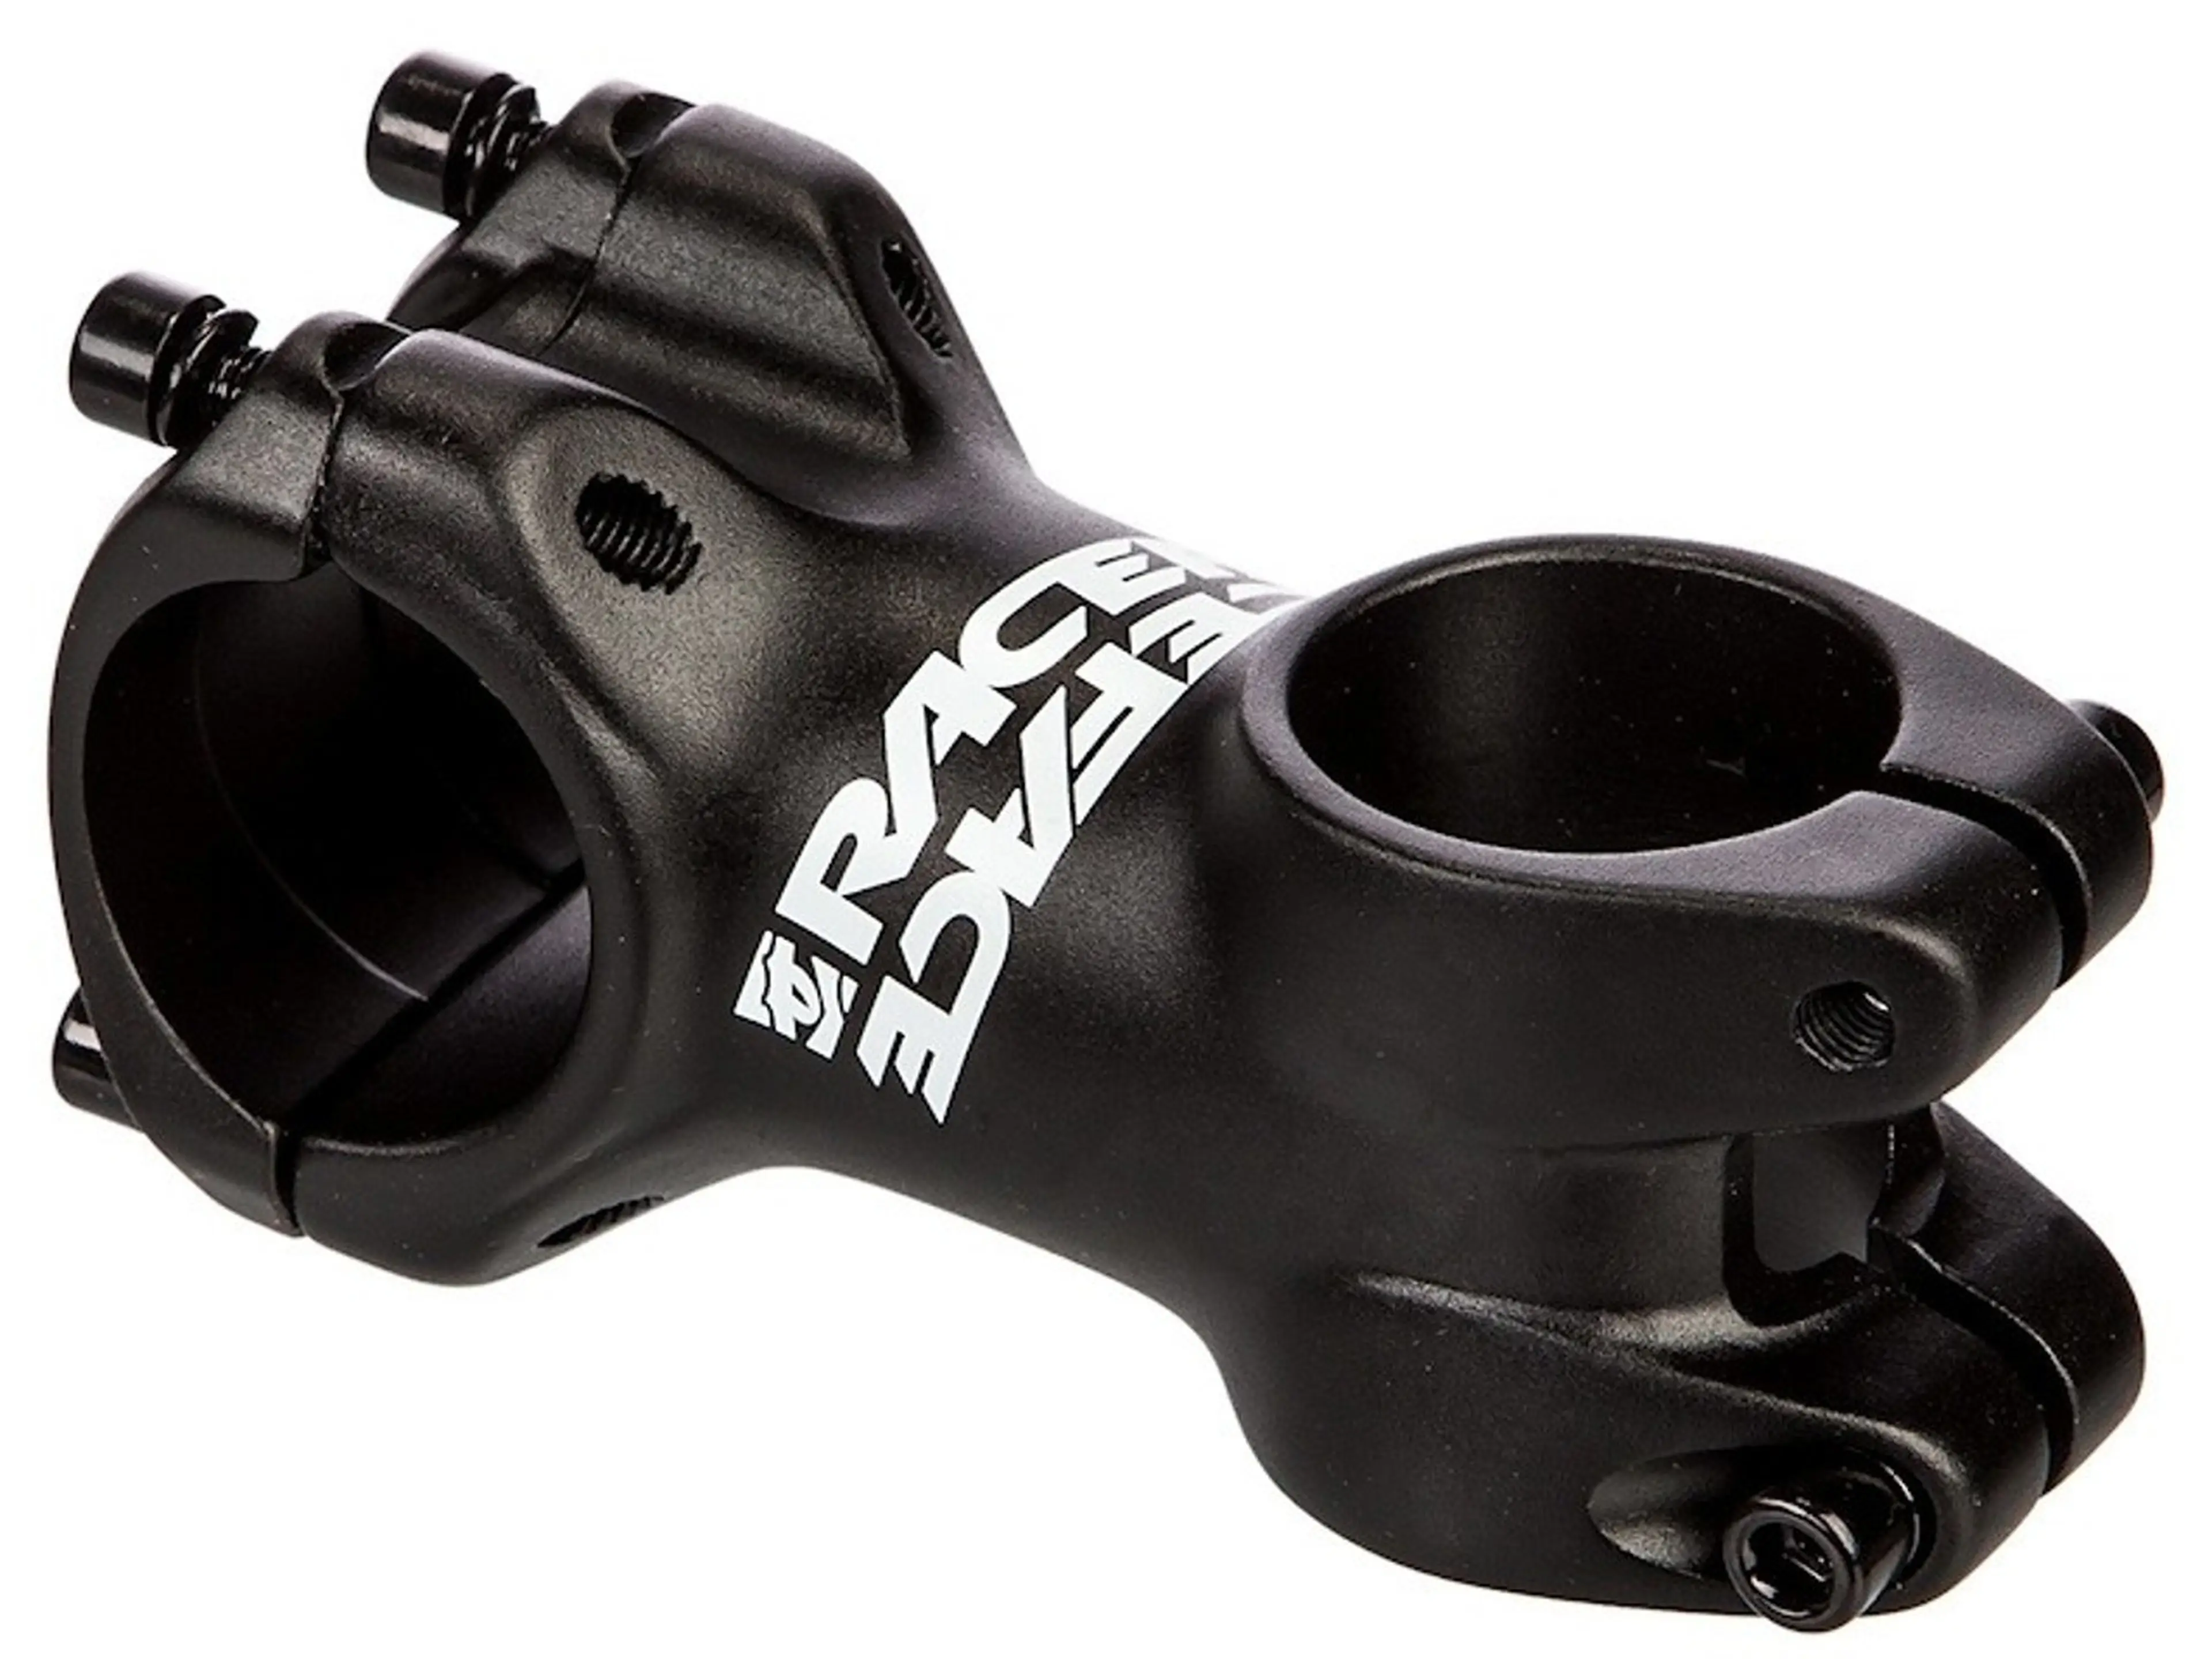 5. Pipe Race Face Ride XC prindere 31.8mm noi